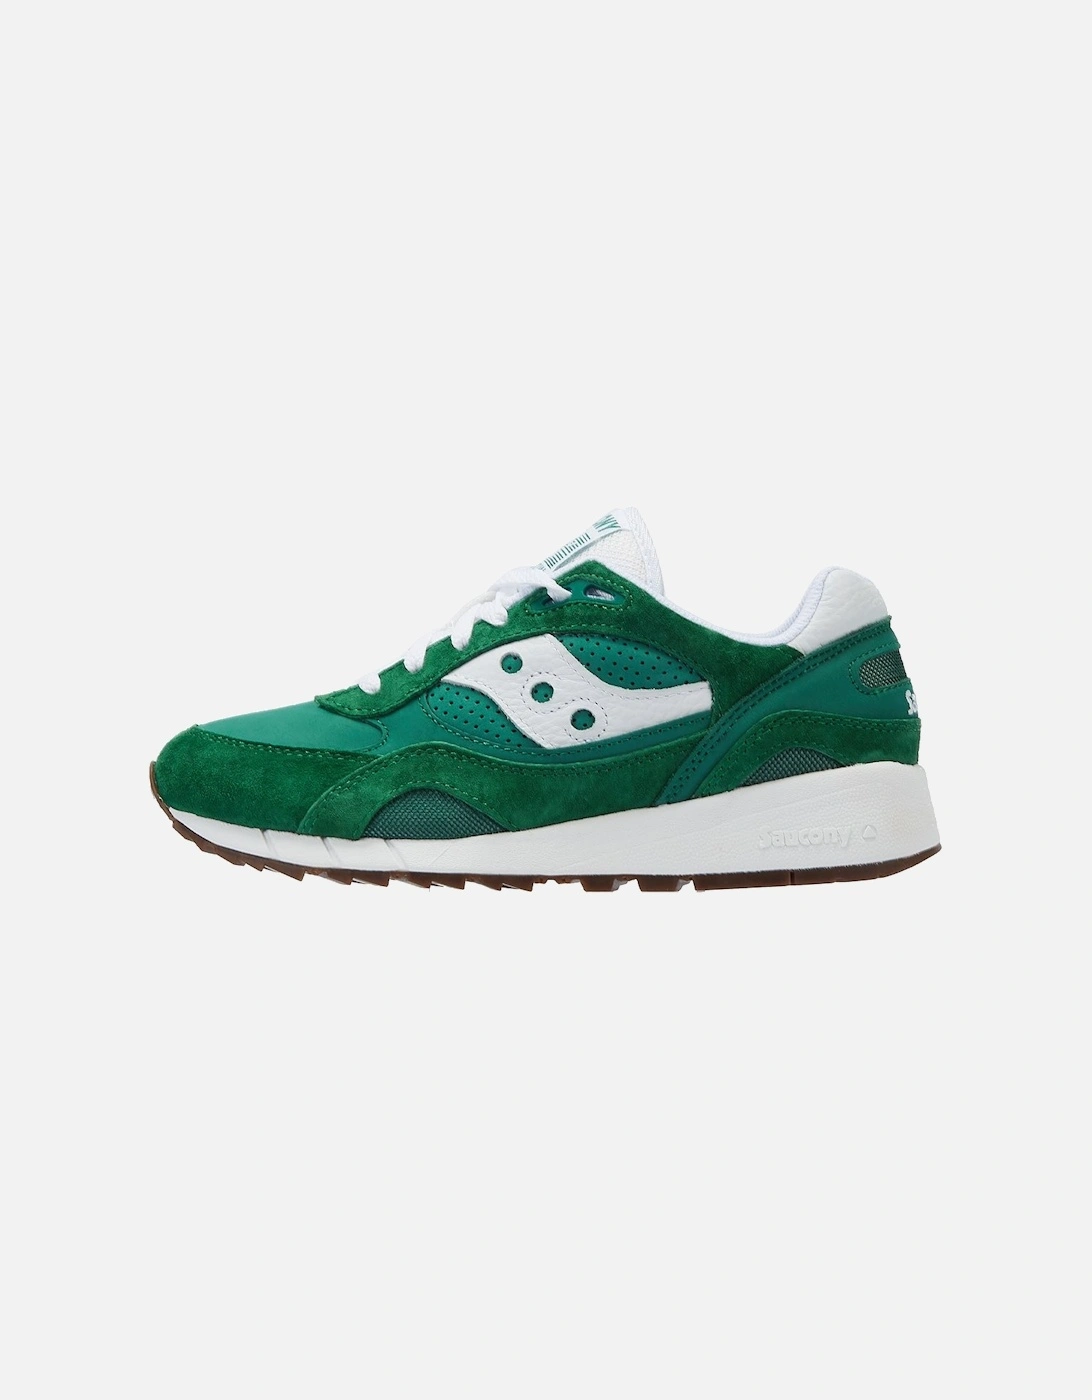 Shadow 6000 Green/White Trainers